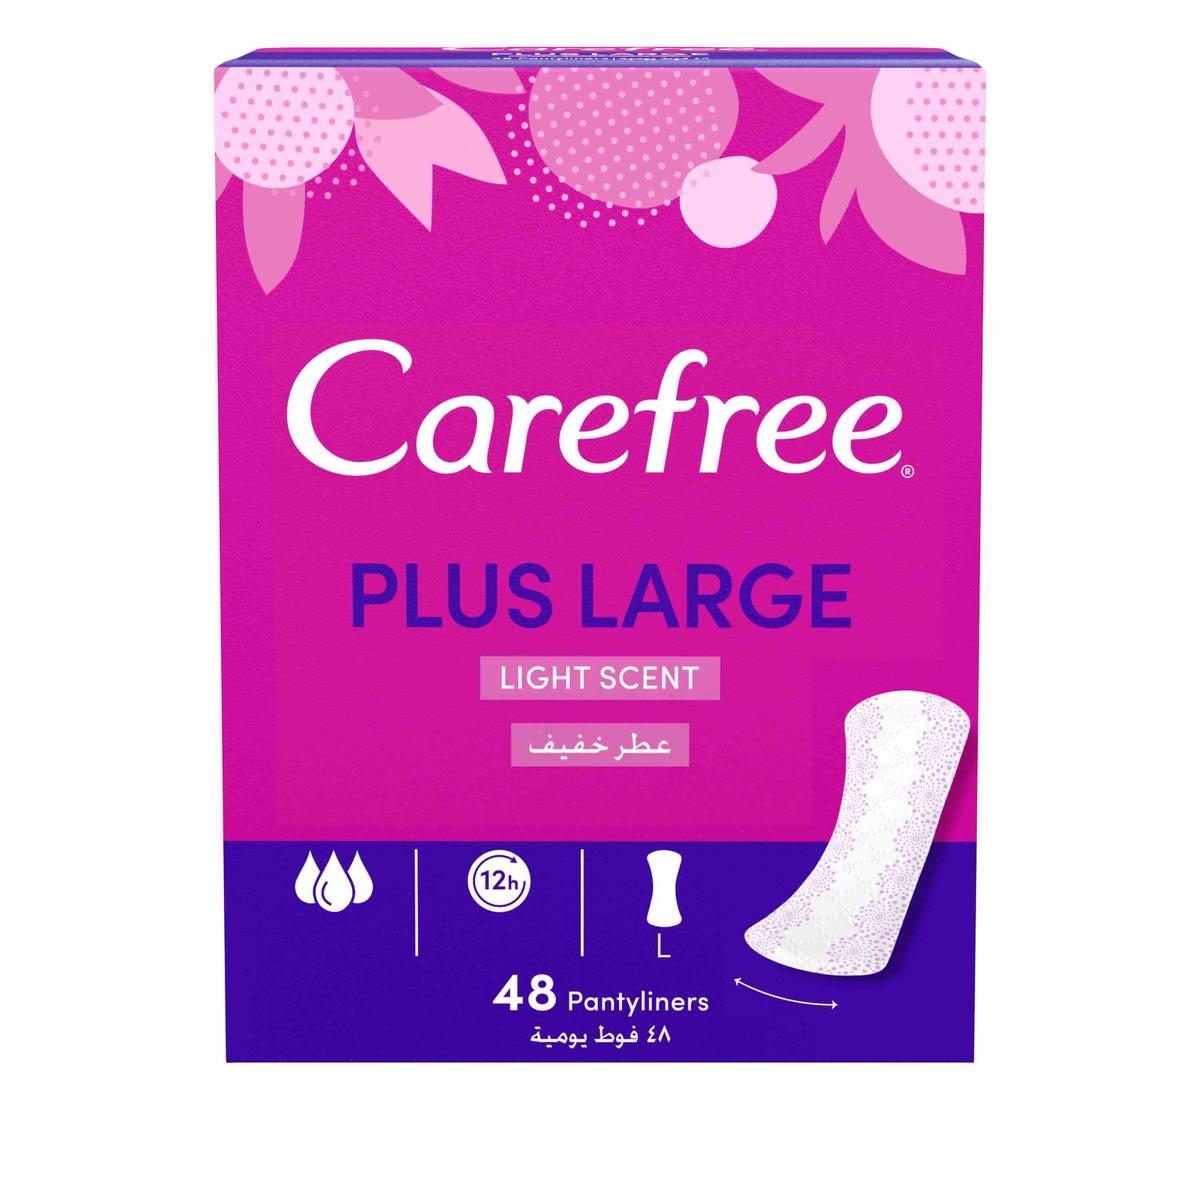 CAREFREE® Plus Large with a Slight Scent Panty Liners